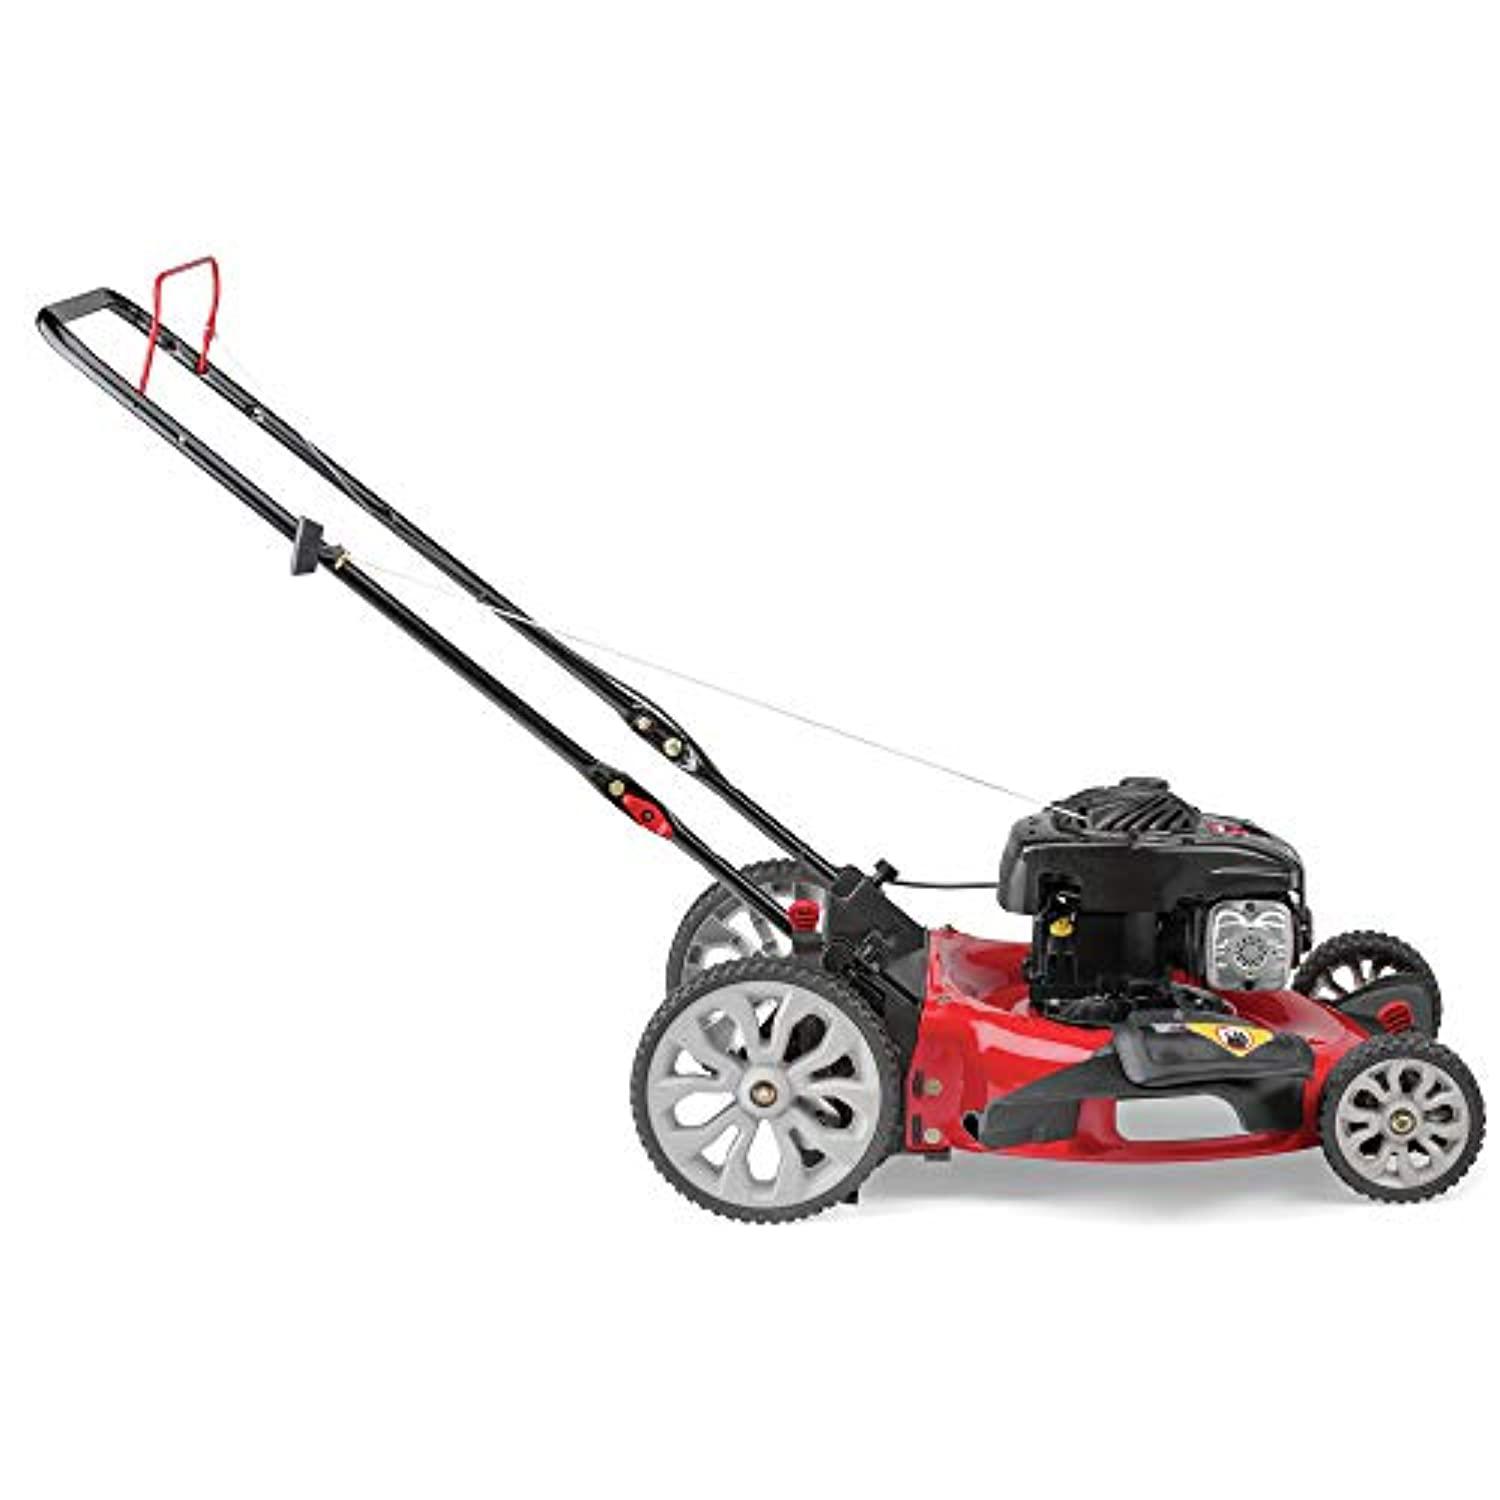 MTD Products 4686473 21 in. 2 in 1 159CC Lawn Push Mower - image 2 of 2